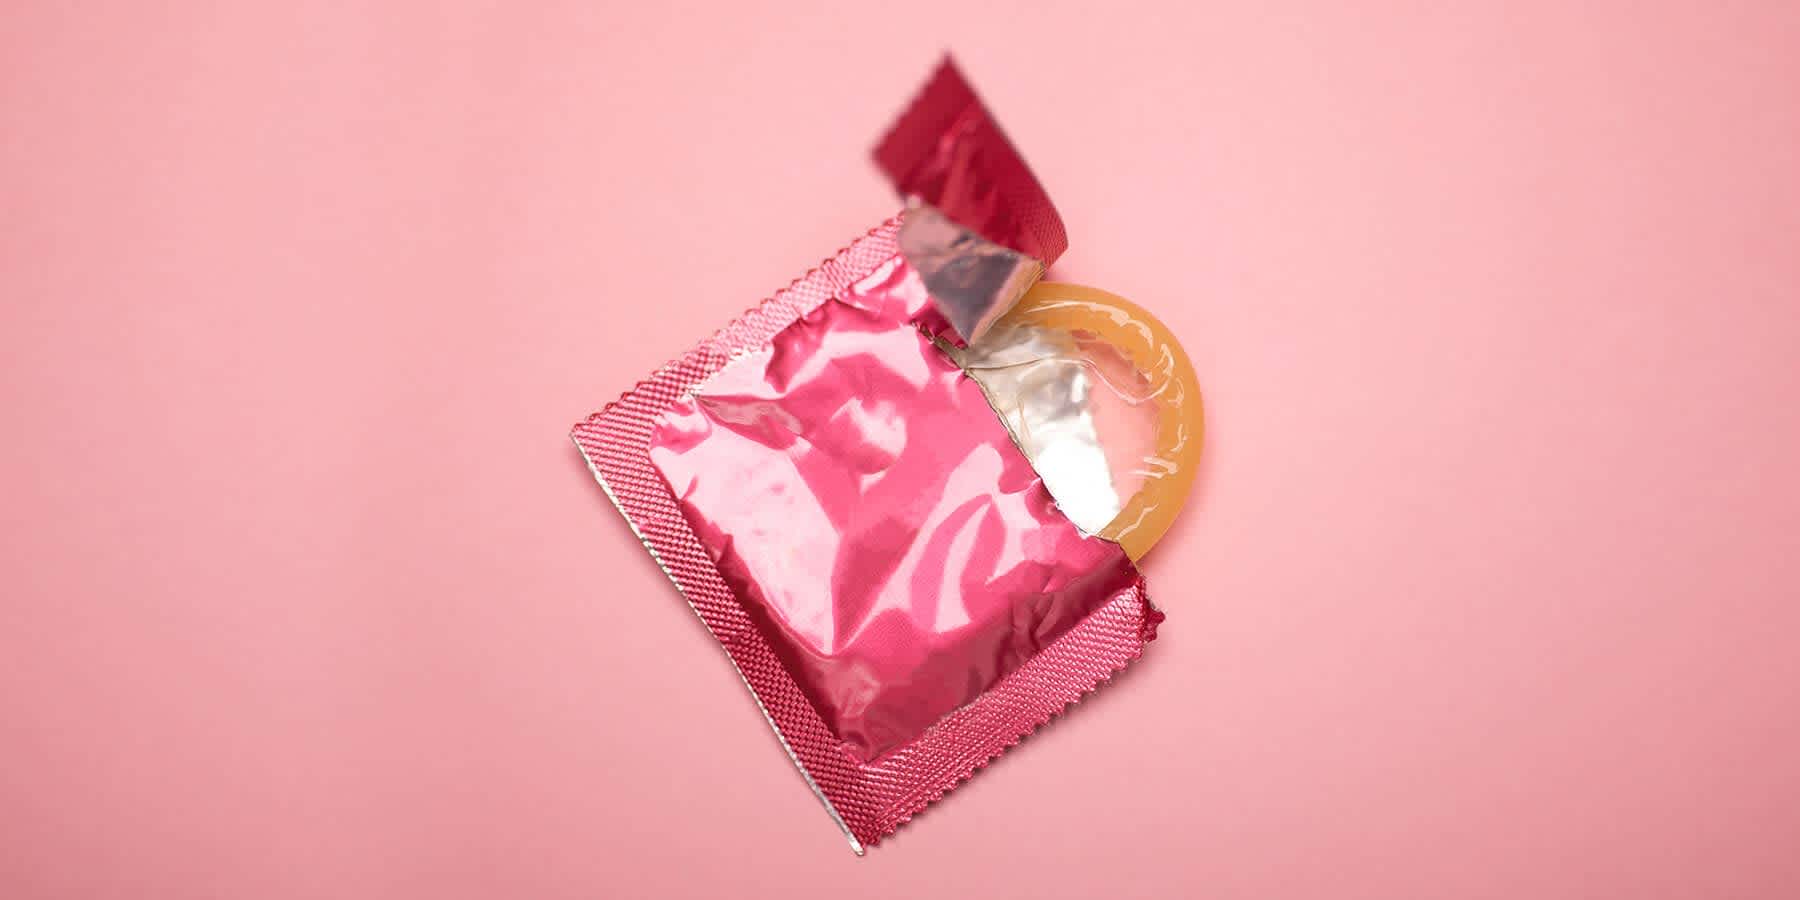 Condom in opened packet against a pink background